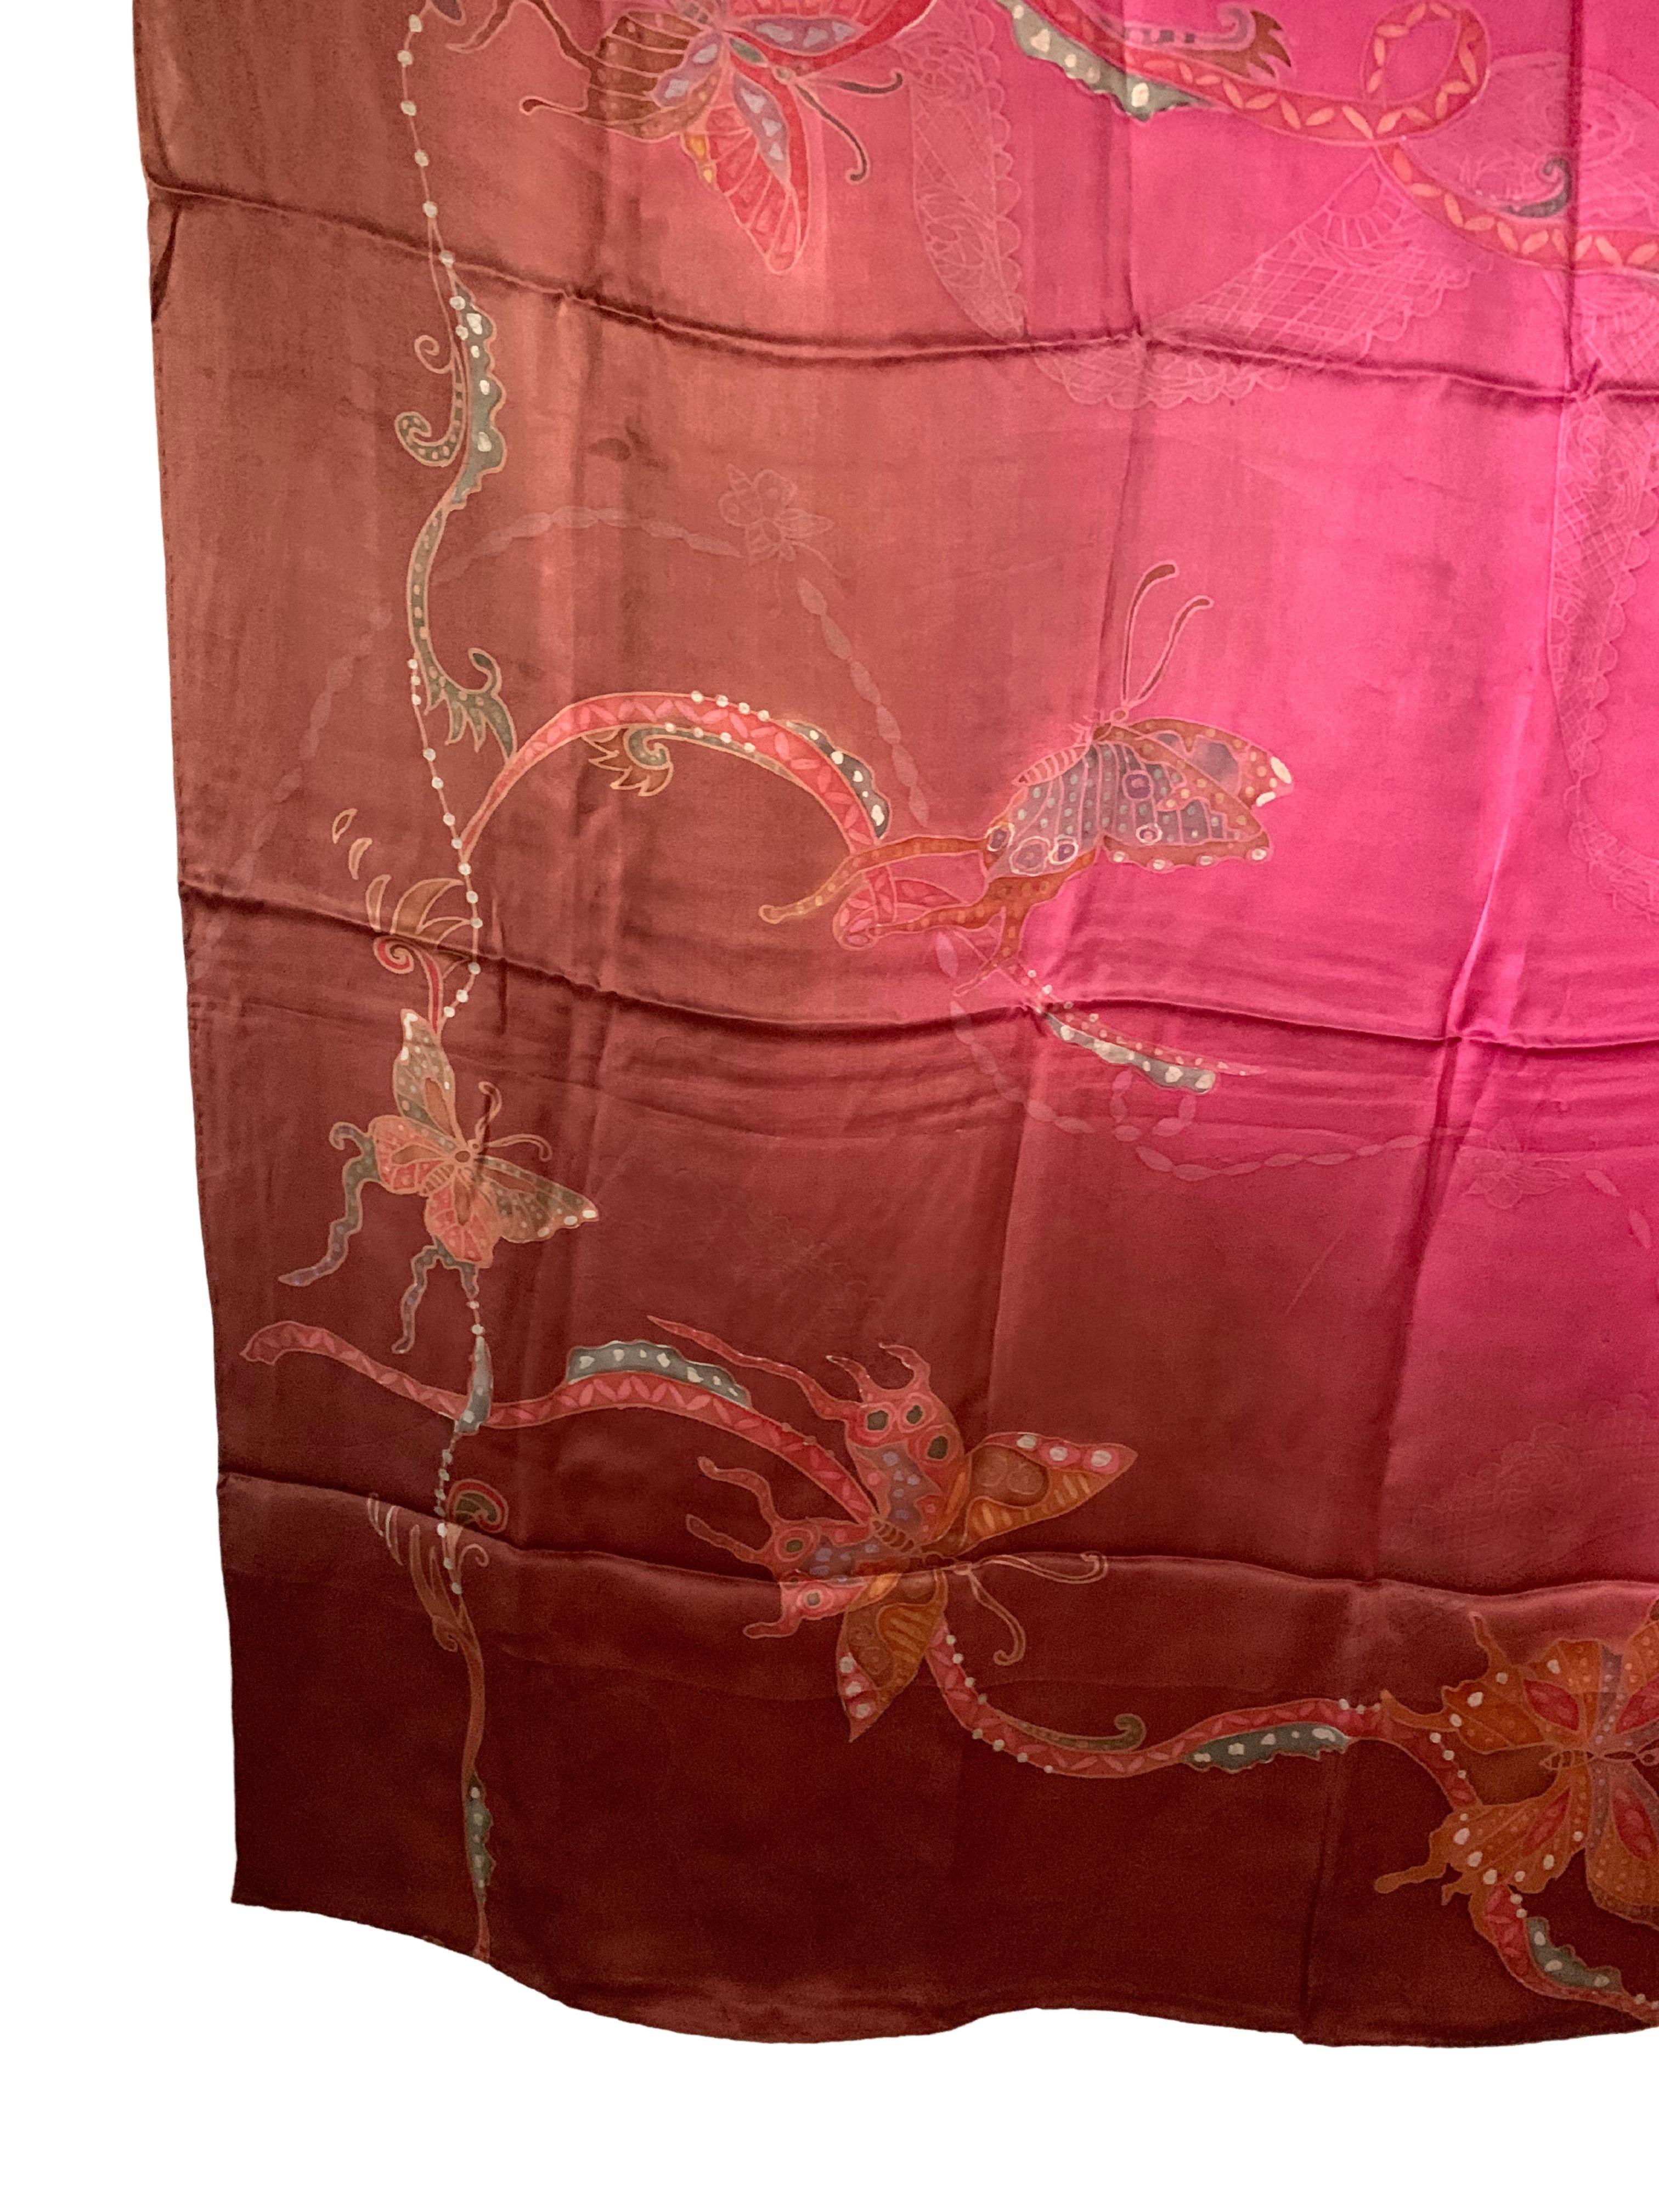 A wonderful Hand-Crafted Silk Textile from Malaysia with Stunning Detailing and shades. A wonderful decorative object to bring warmth and color to any space. This textile was hand-crafted by local weavers.